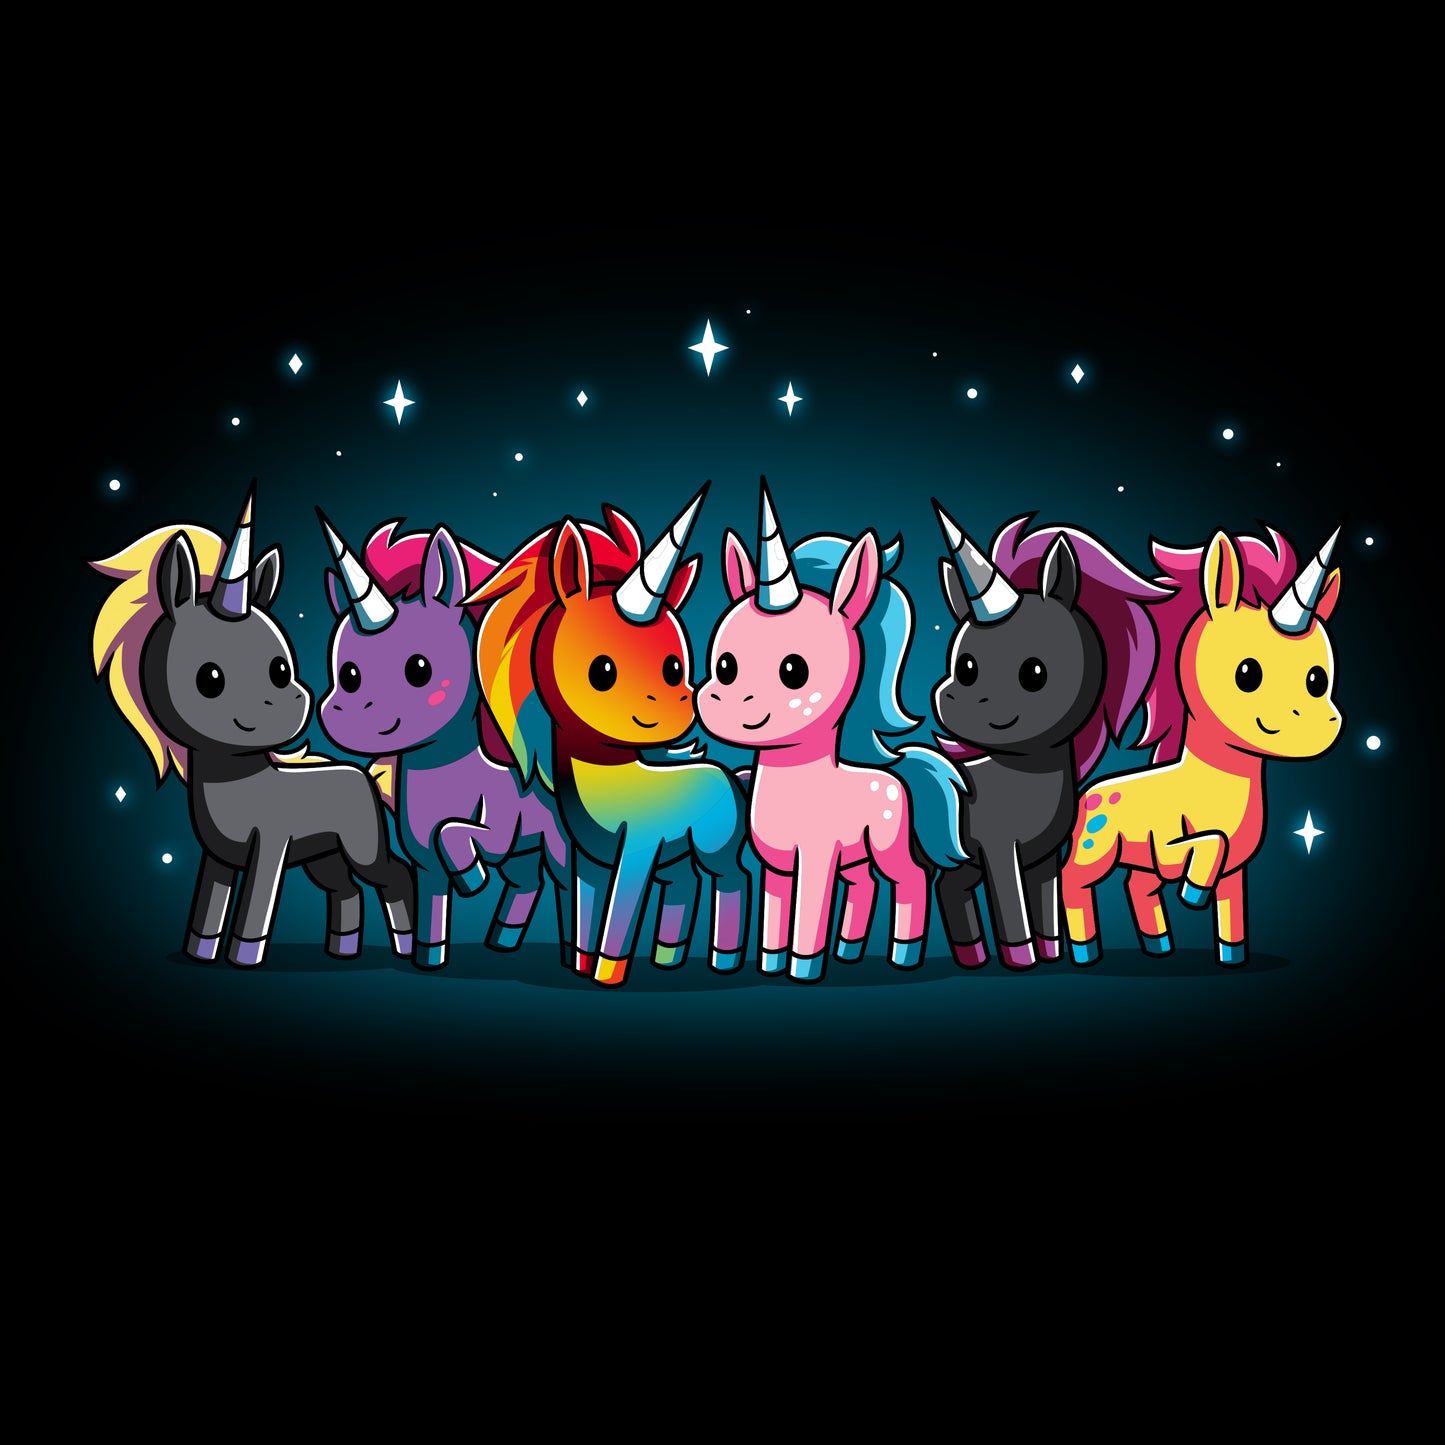 A group of colorful Unicorn Pride unicorns showing pride and representing the LGBTQ+ community, made by TeeTurtle.